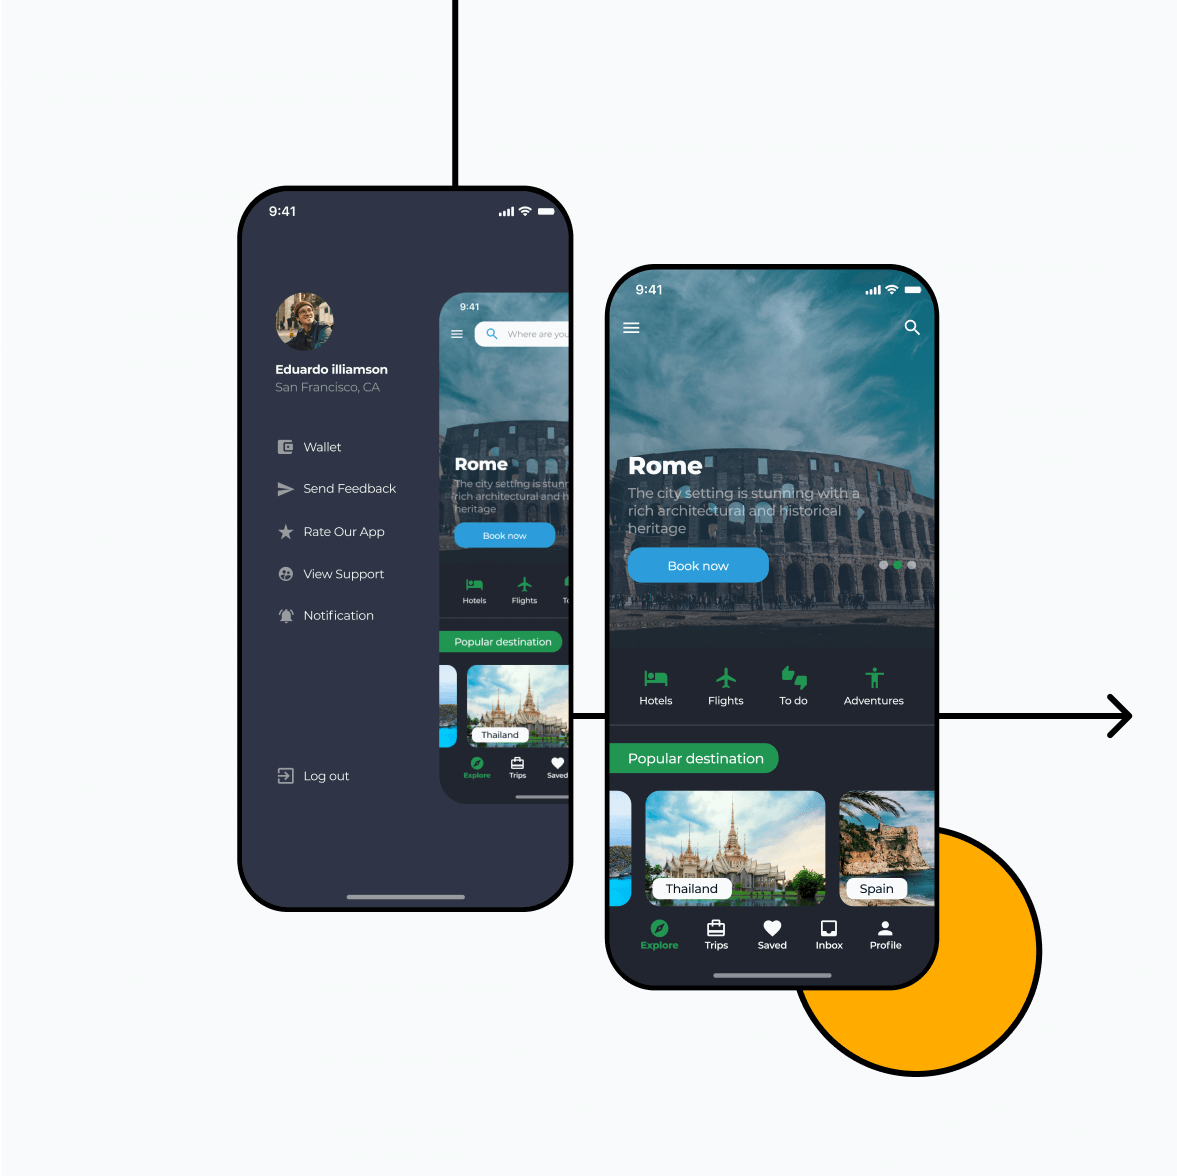 Itinerary app with locations